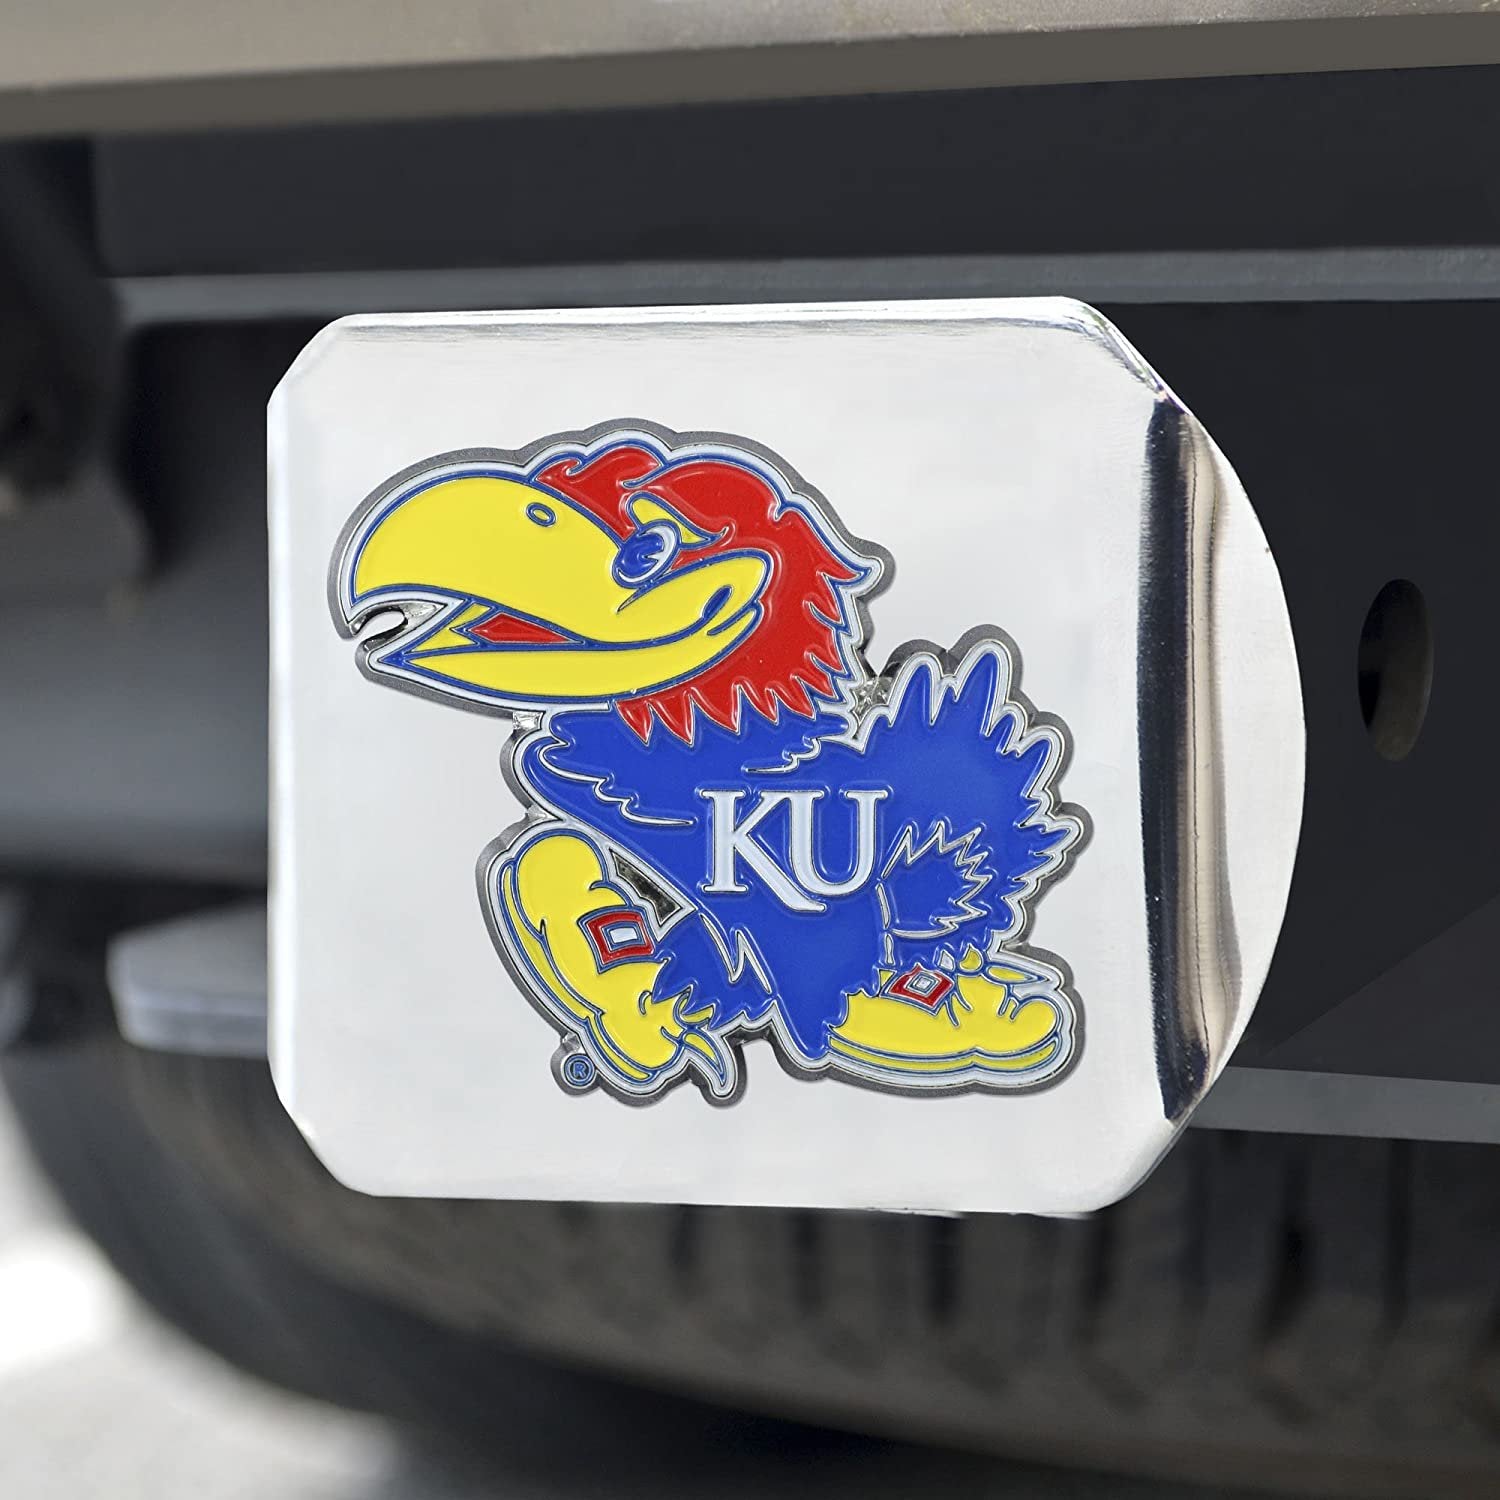 Kansas Jayhawks Hitch Cover Solid Metal with Raised Color Metal Emblem 2" Square Type III University of